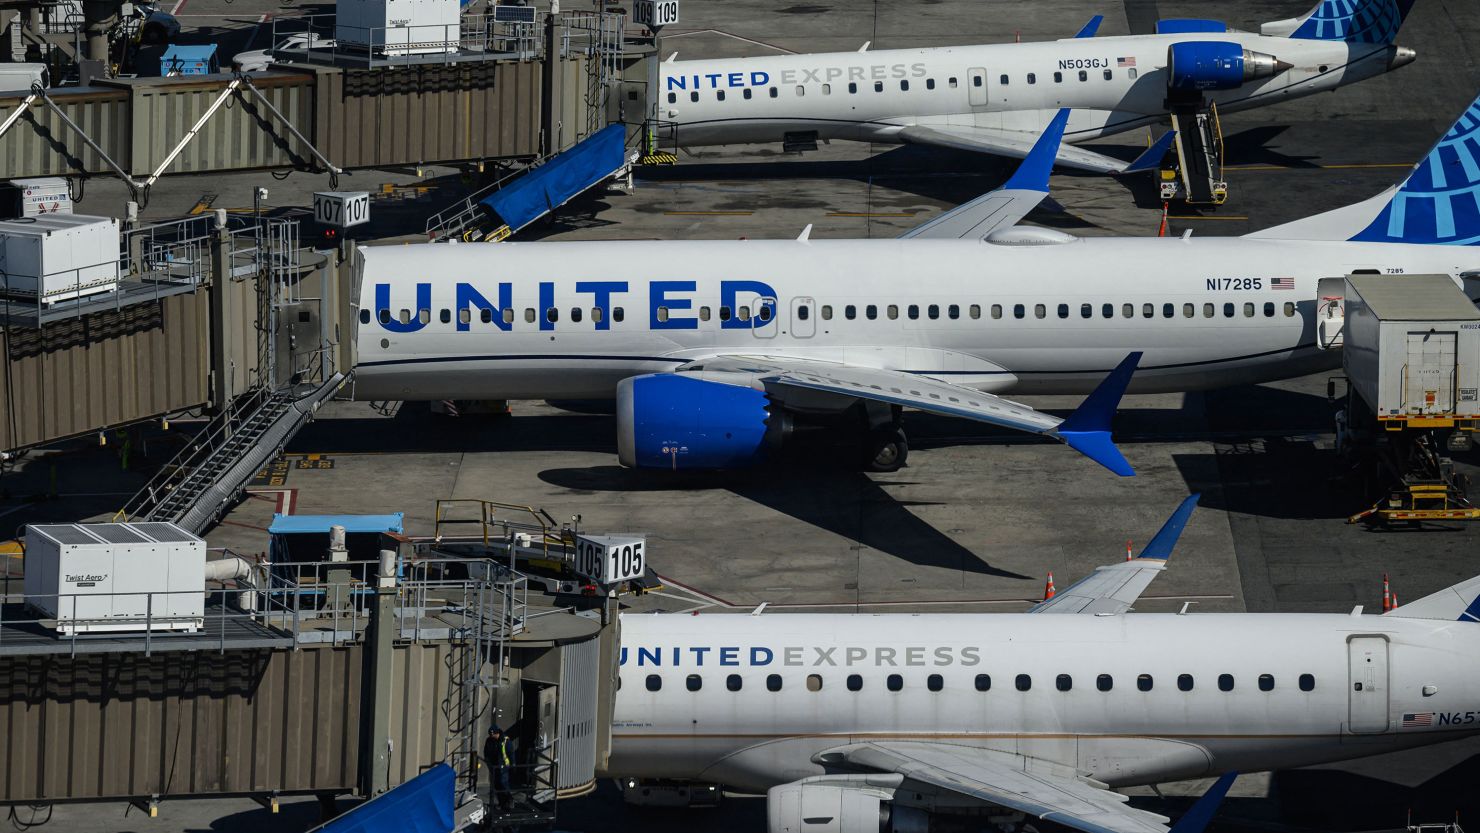 United Airlines aircrafts are parked at Newark Liberty International Airport in Newark, New Jersey, on March 9, 2023.